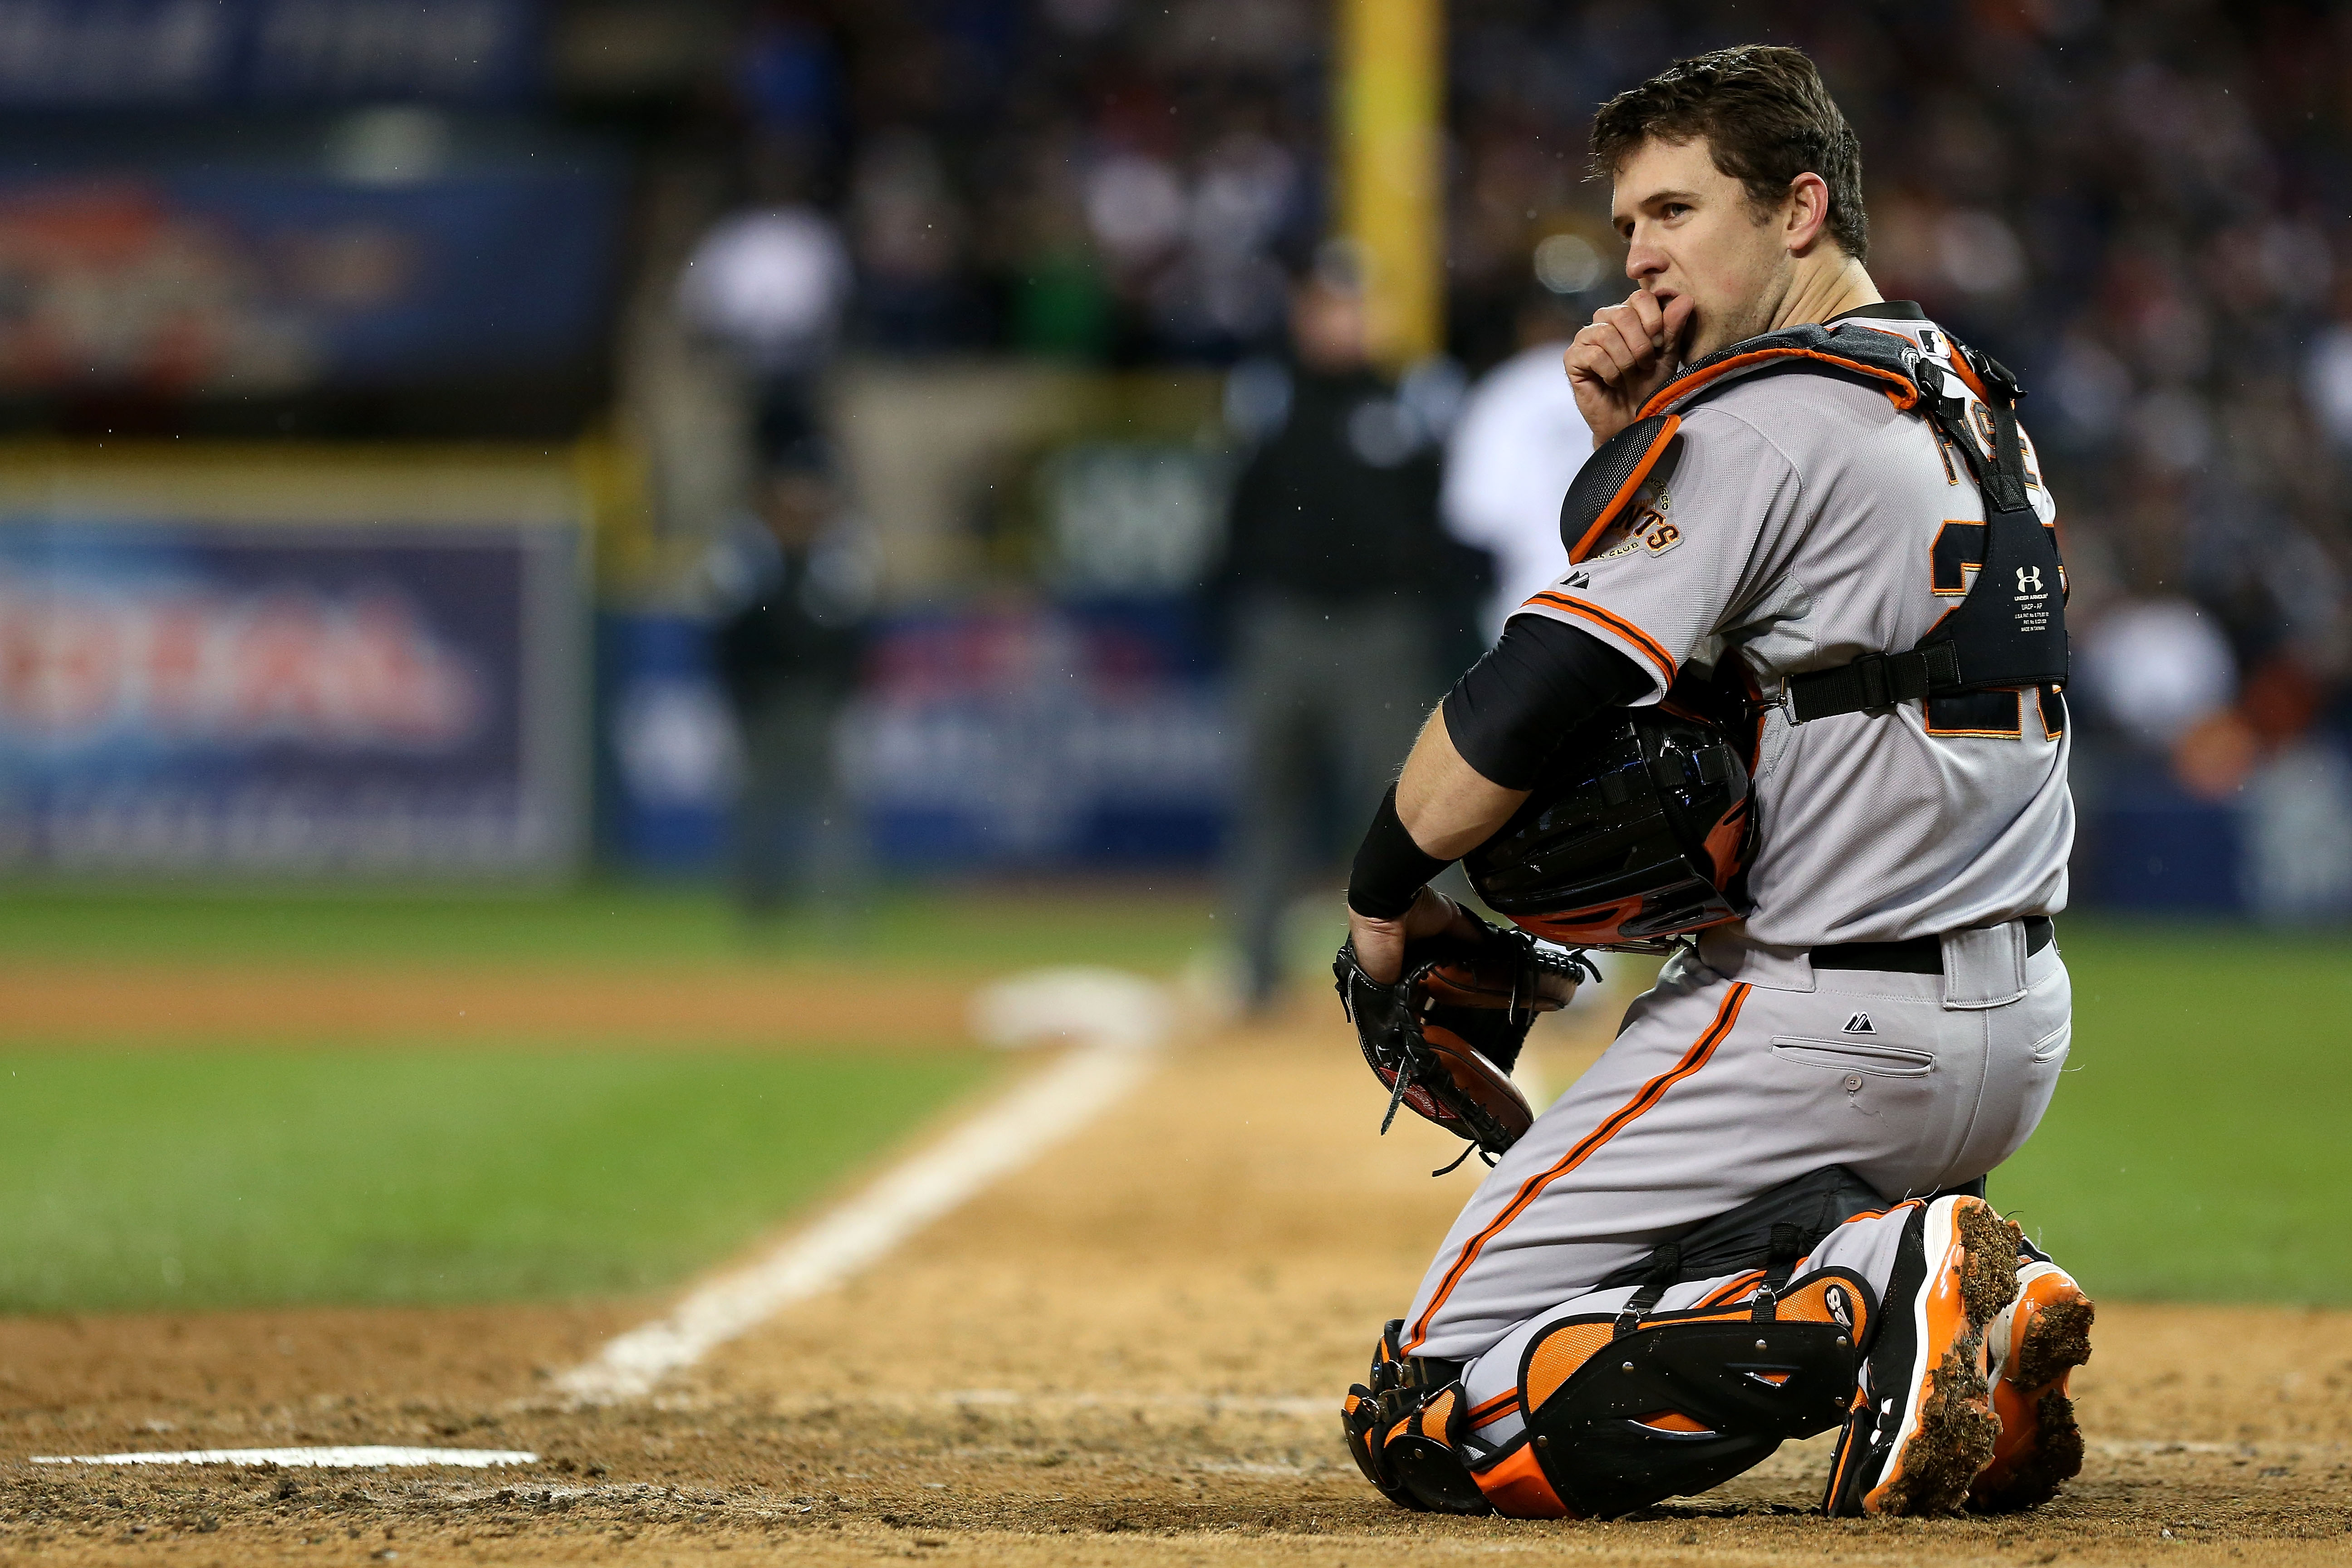 Buster Posey Wallpaper - iXpap